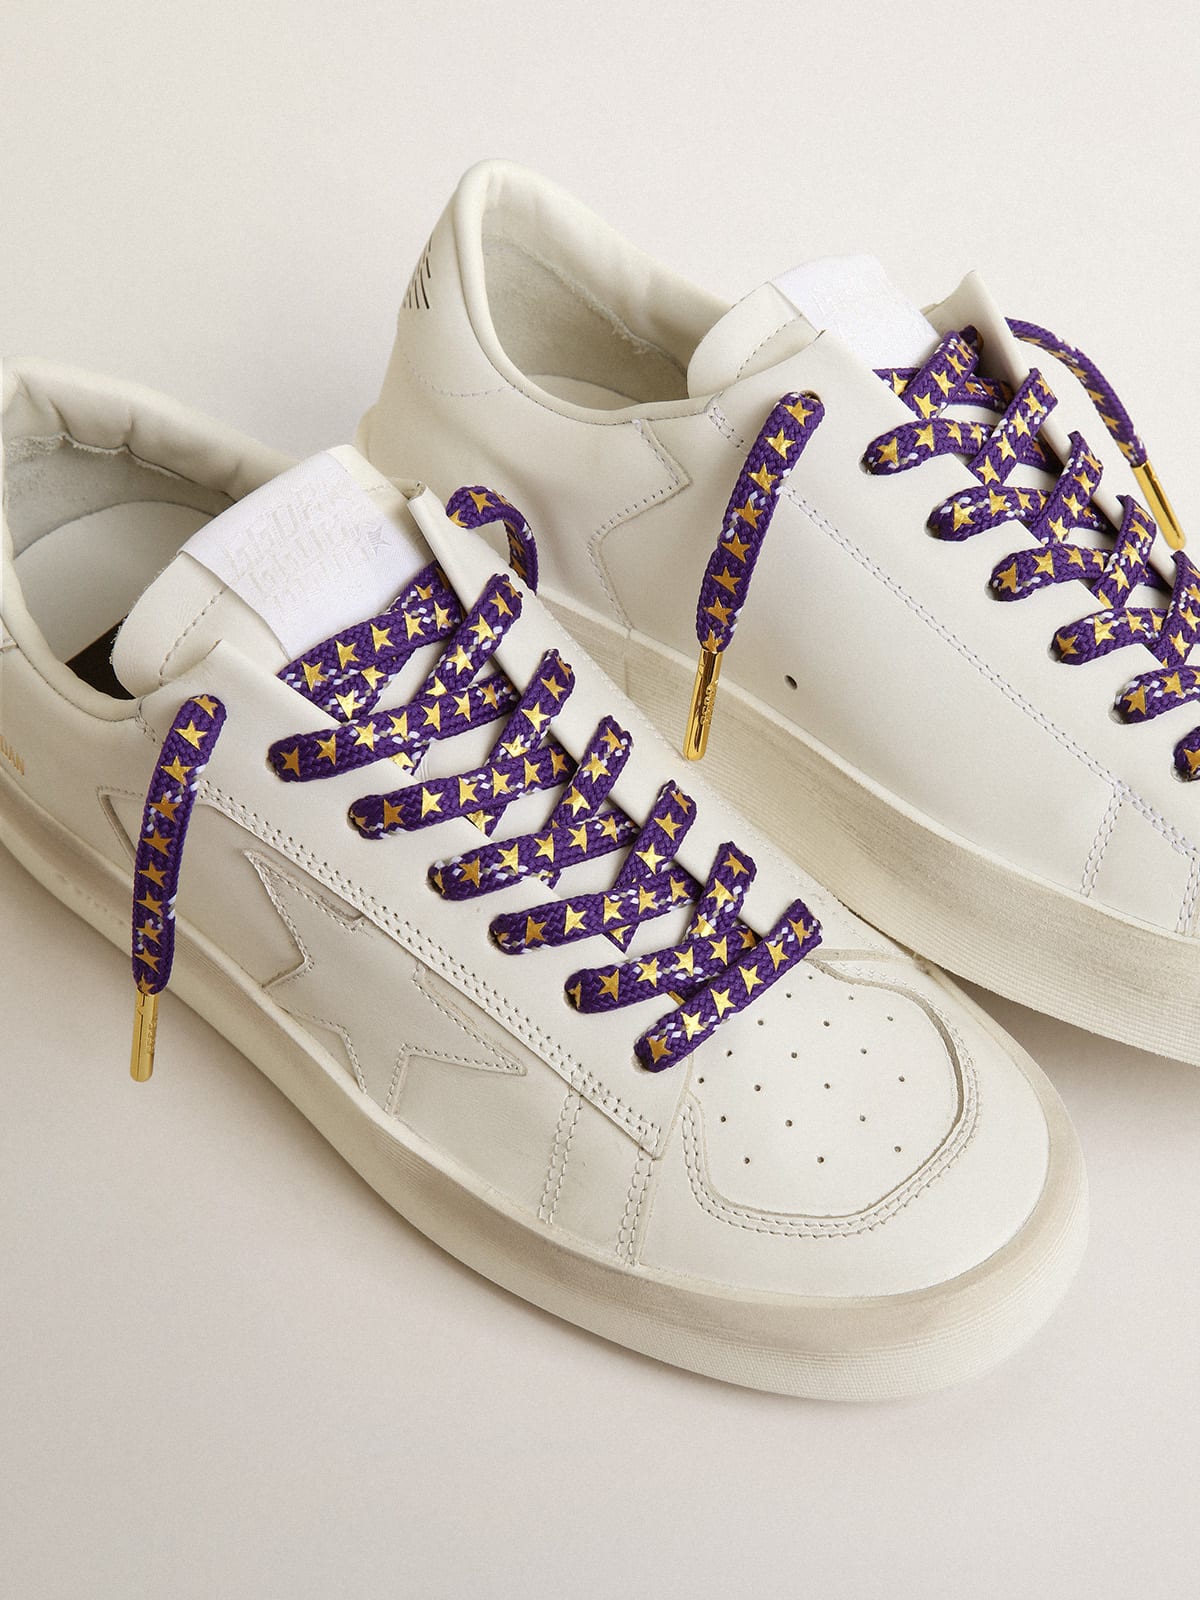 Golden Goose - Purple laces with decorations and contrasting gold stars in 